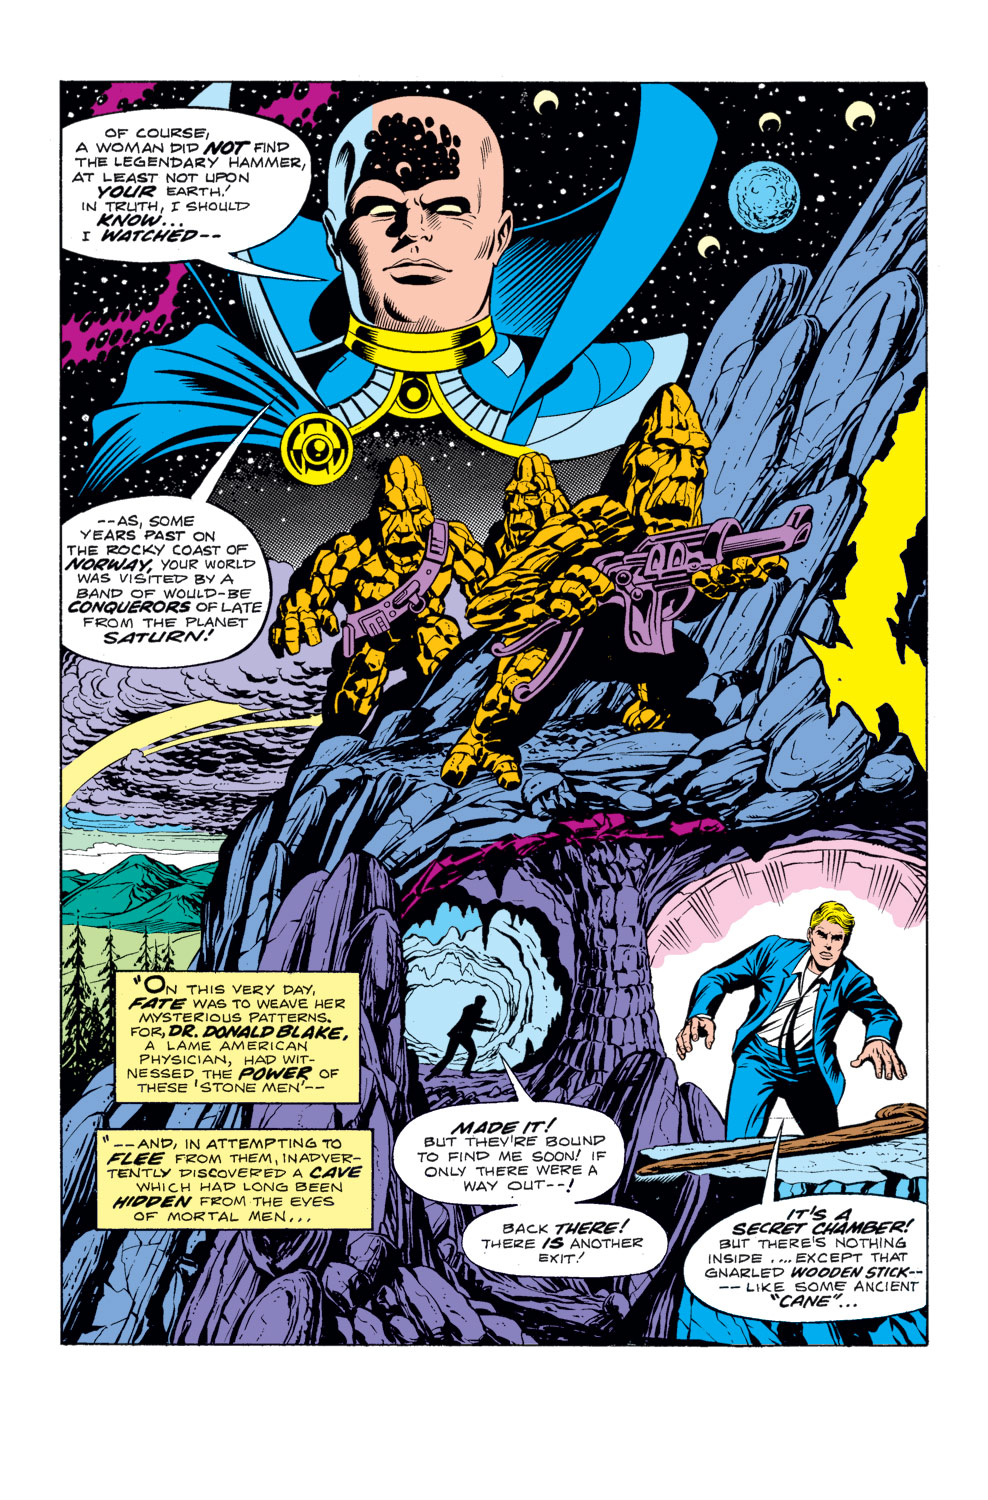 What If? (1977) issue 10 - Jane Foster had found the hammer of Thor - Page 3